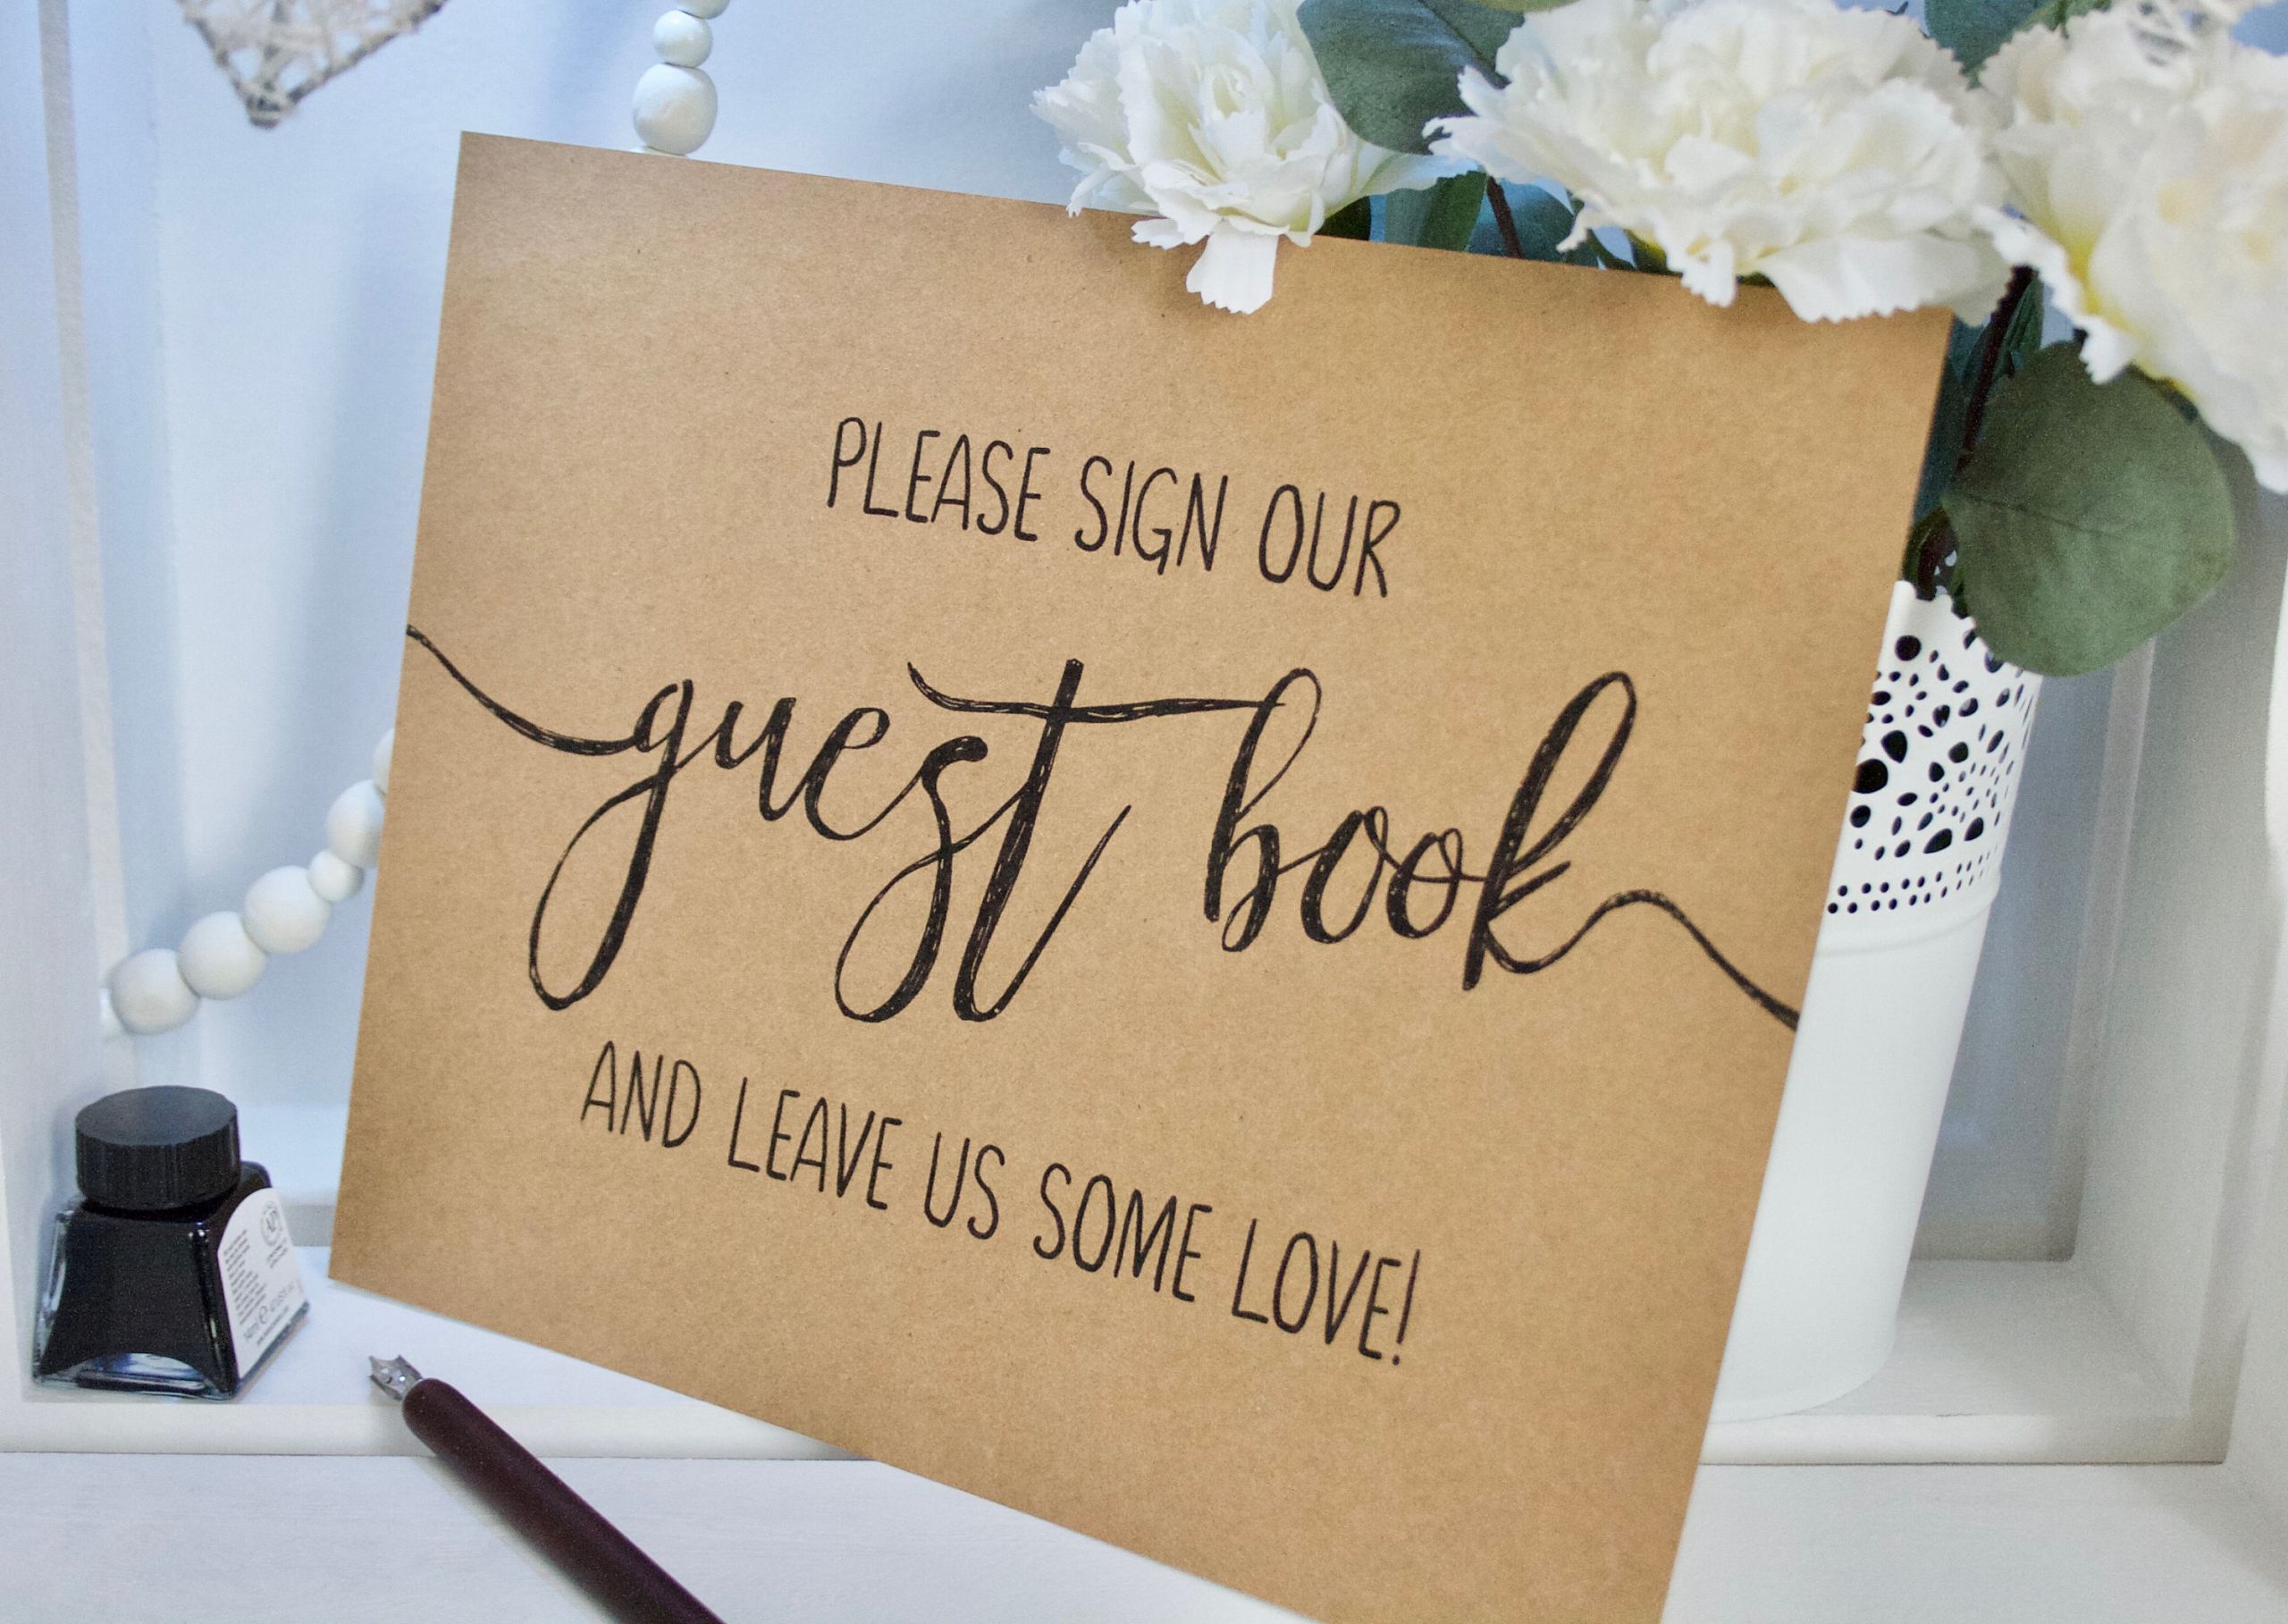 Rustic Wedding Guest Book Uk
 PRINTED Rustic Wedding Guest Book Sign Please Sign Our